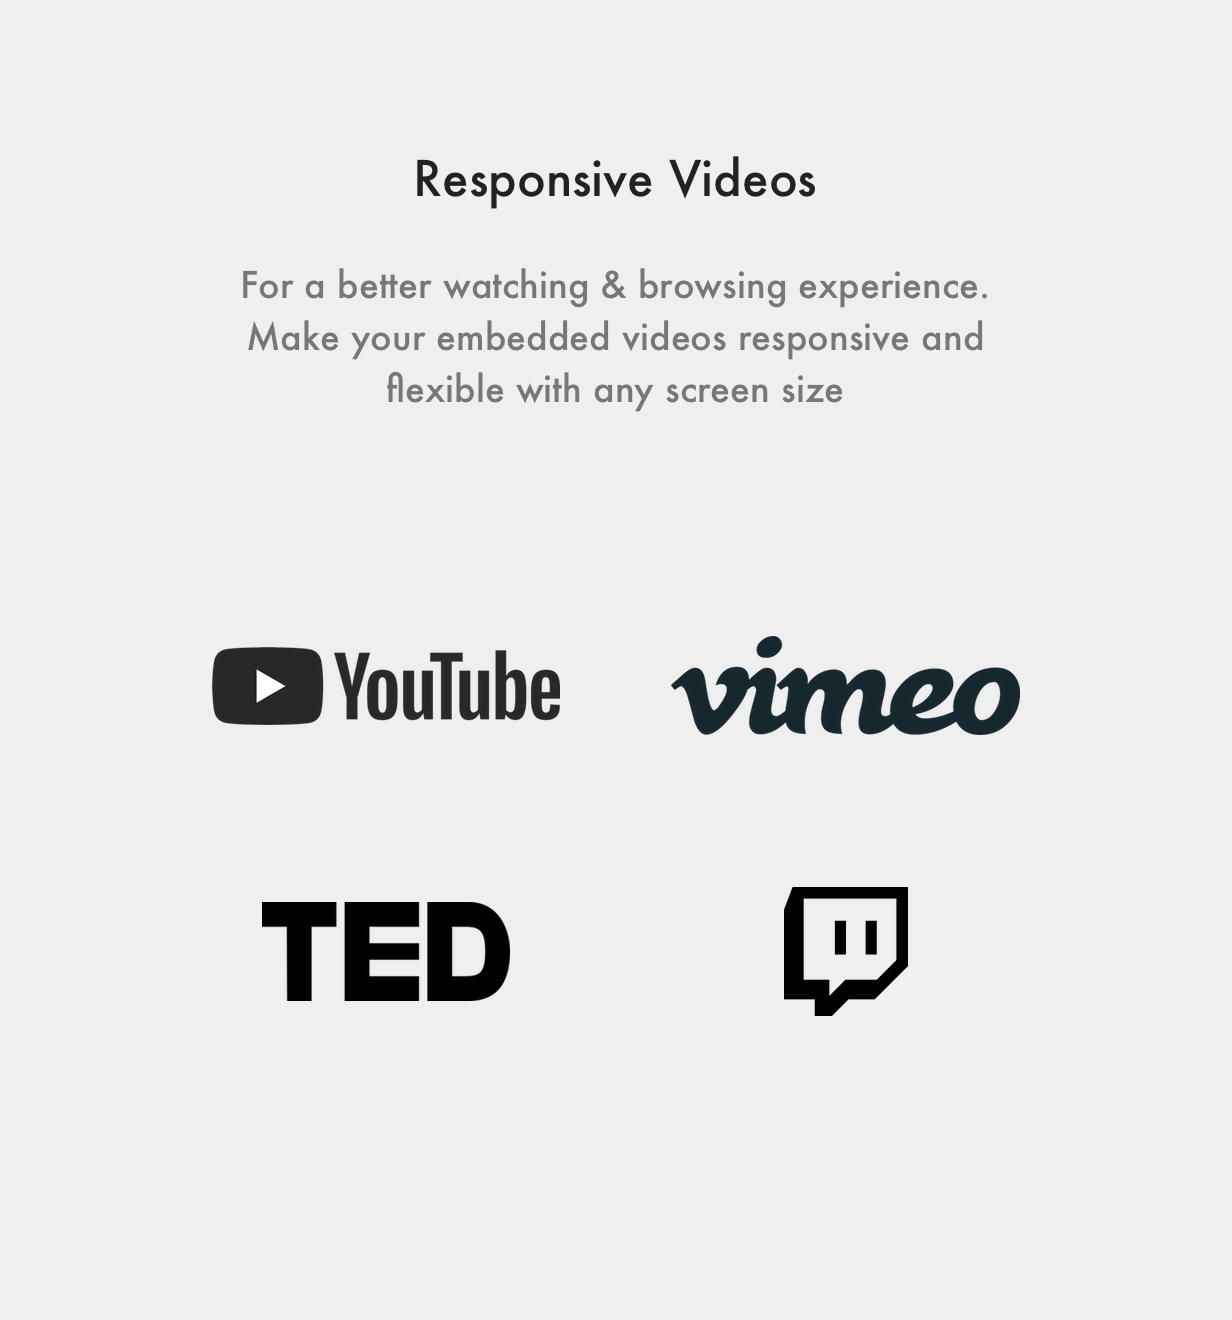 Aspire Ghost Theme Responsive Videos (YouTube, Vimeo, Twitch, and TED)